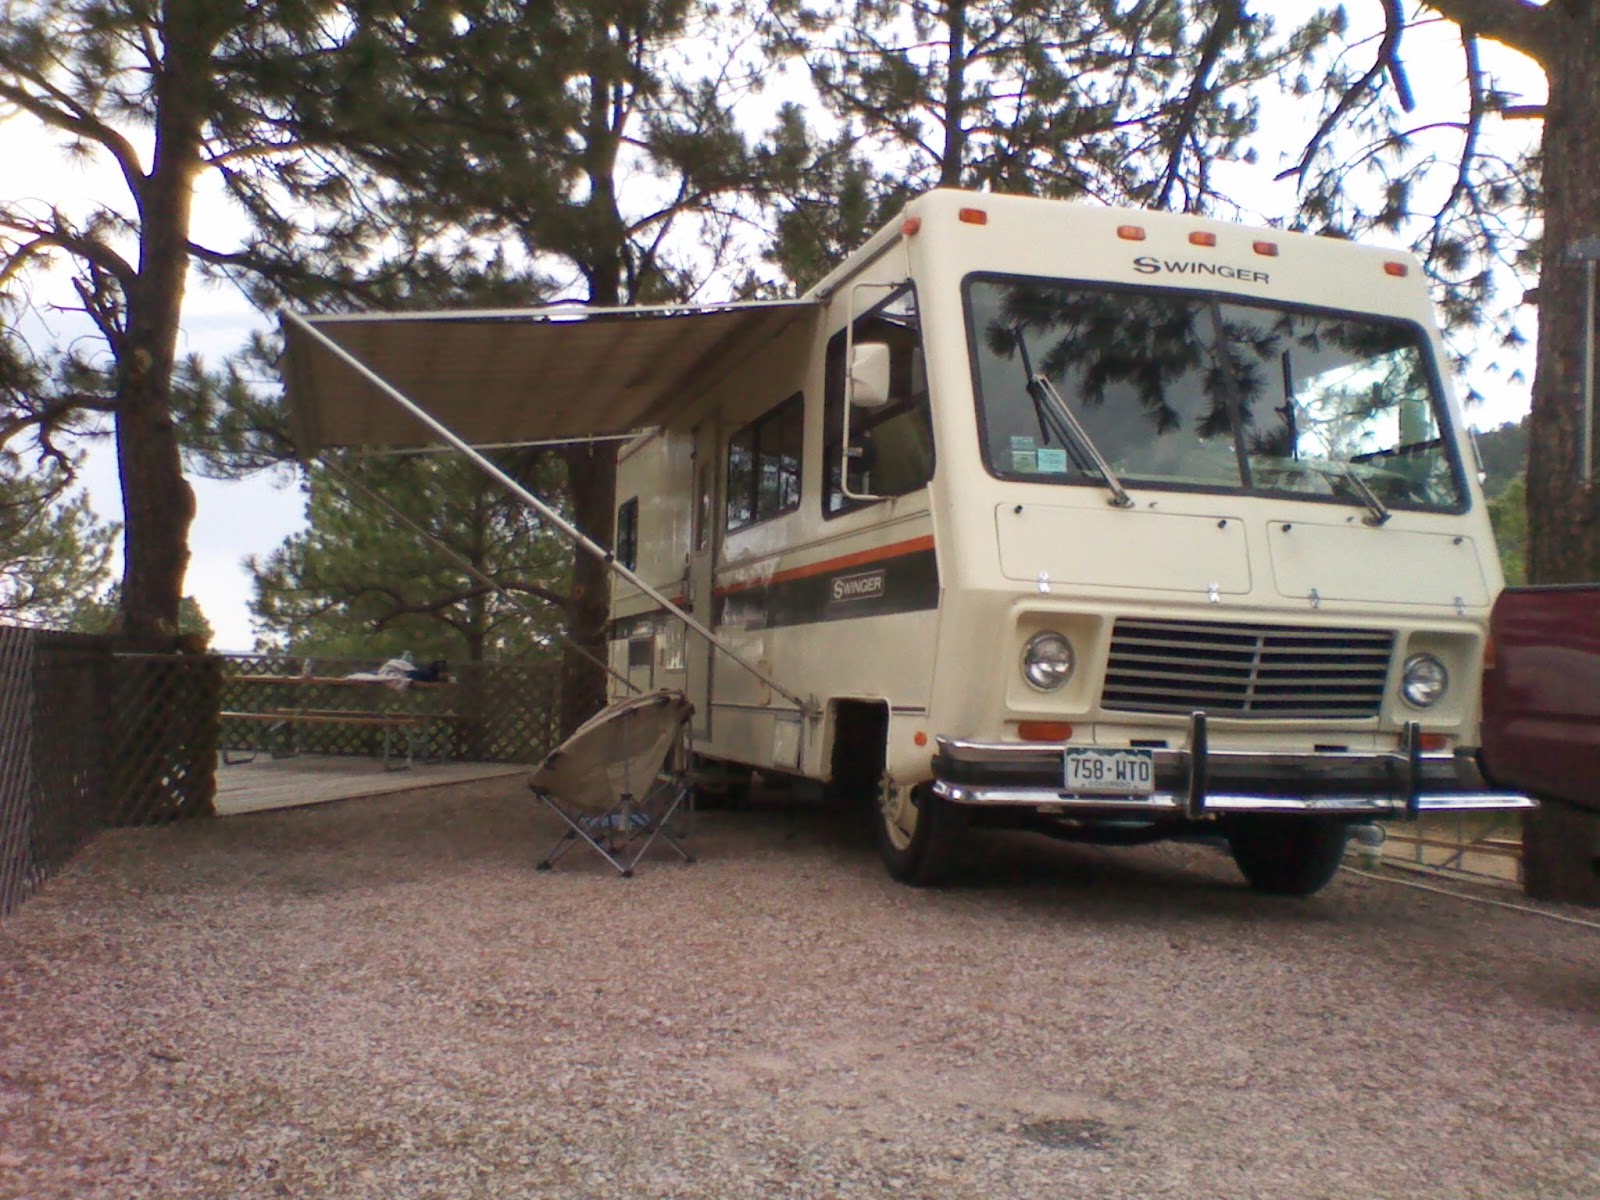 My Vintage 1978 Georgie Boy Swinger Executive Lounge Motorhome Welcome to yet another one of my Motorhomes, my 1978 Swinger Executive Lounge Motorhome manufactured by Georgie Boy Industries picture